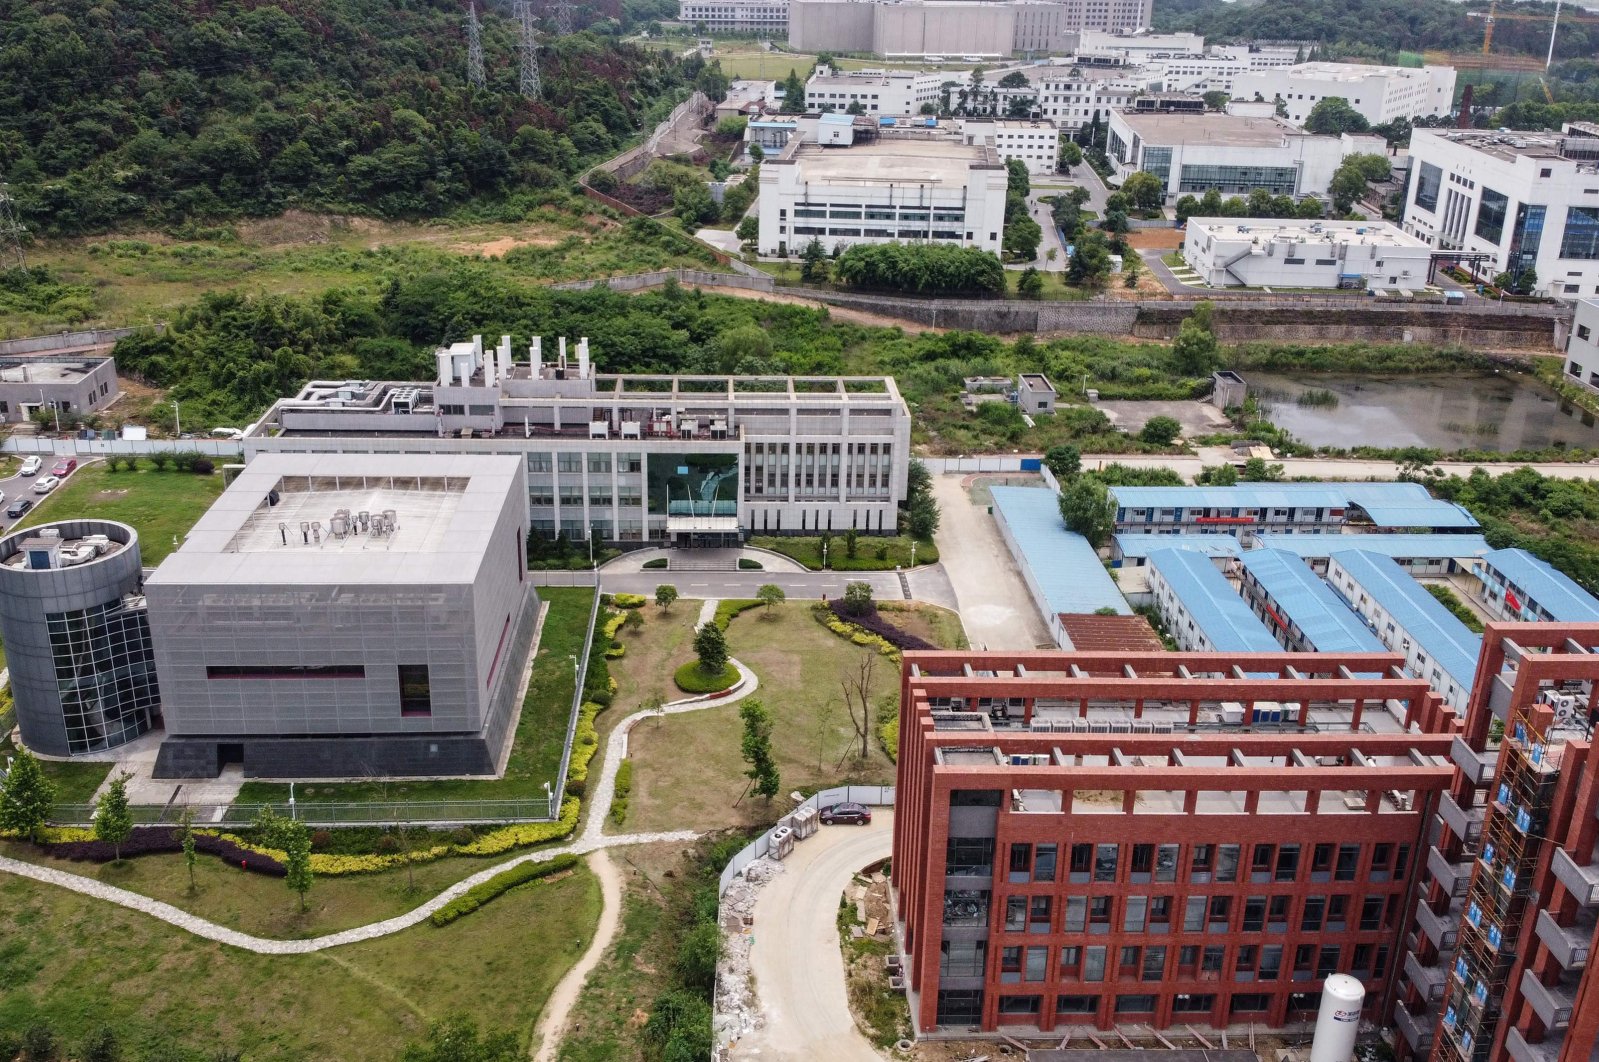 This aerial view shows the P4 laboratory (L) on the campus of the Wuhan Institute of Virology, Wuhan, central Hubei province, China, May 13, 2020. (AFP Photo)